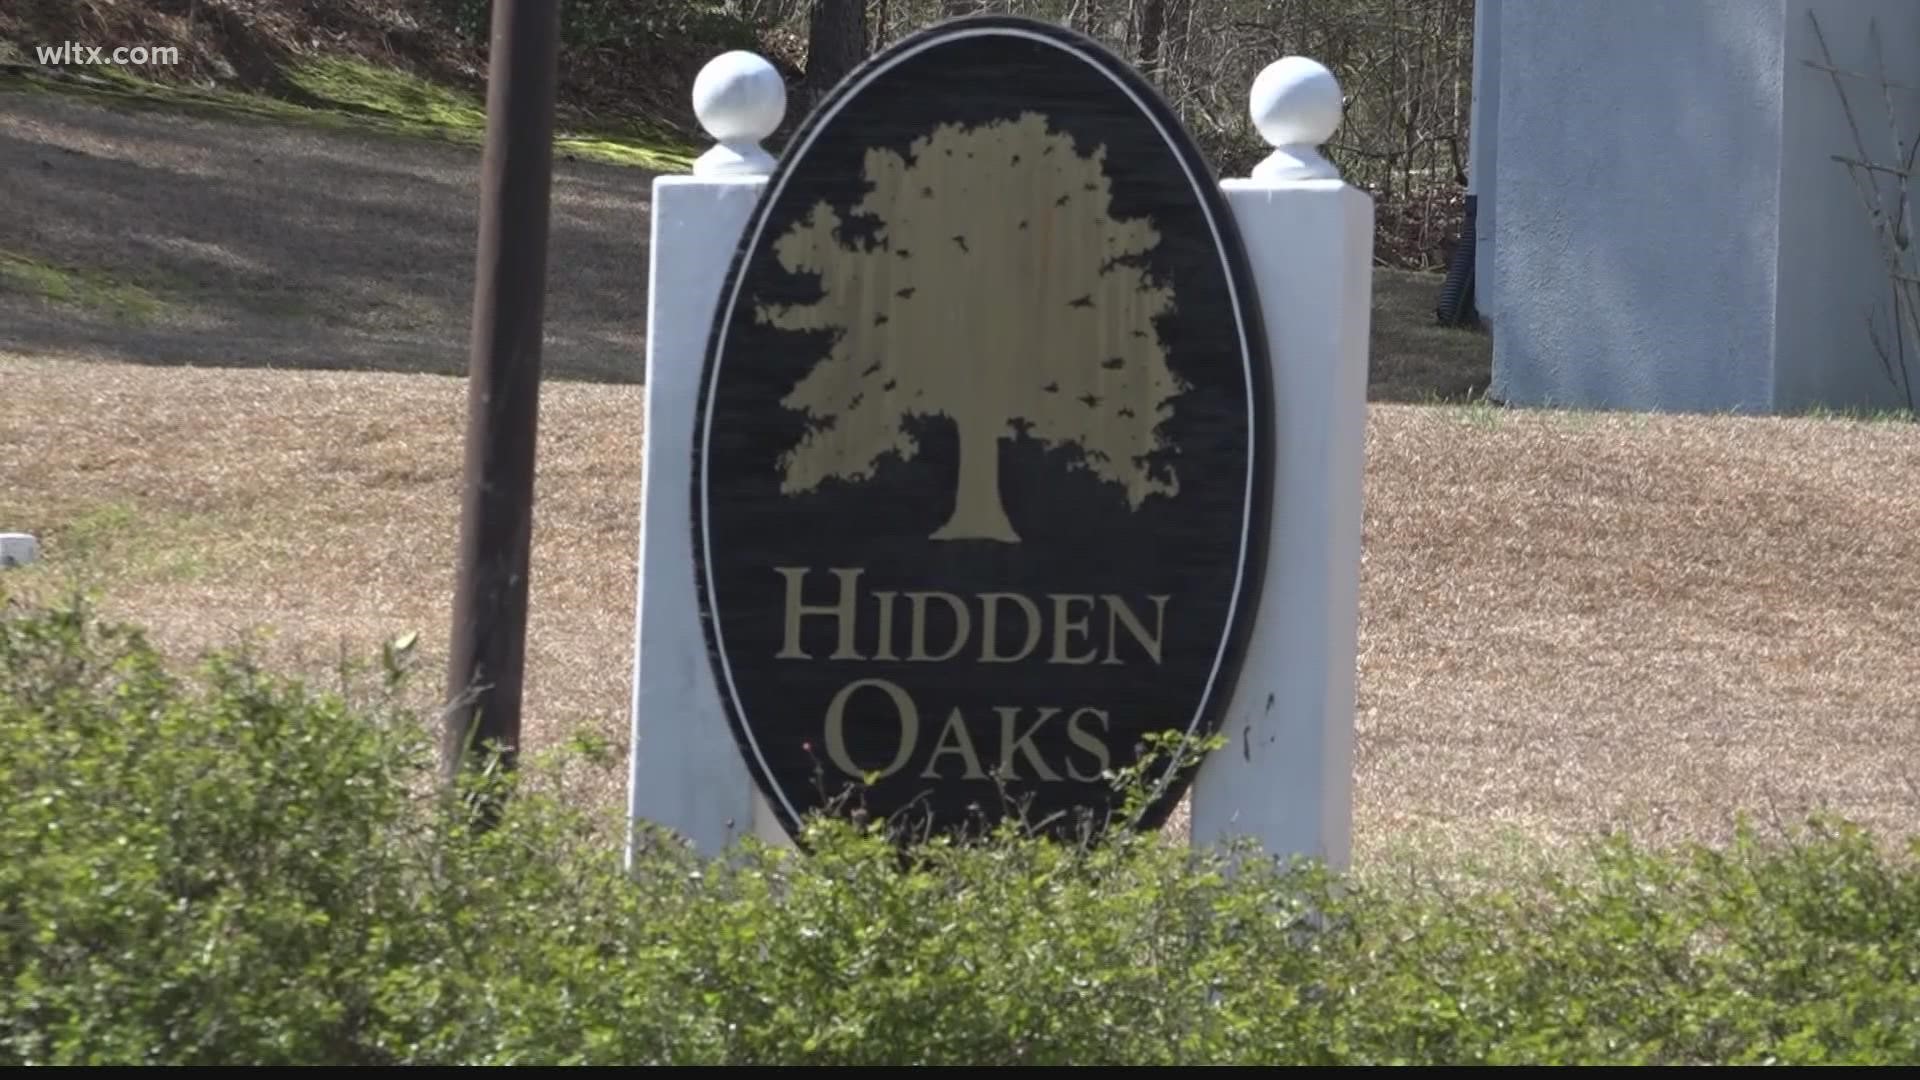 As of this month, Irmo town council is working to enhance safety in a neighborhood called Hidden Oaks.